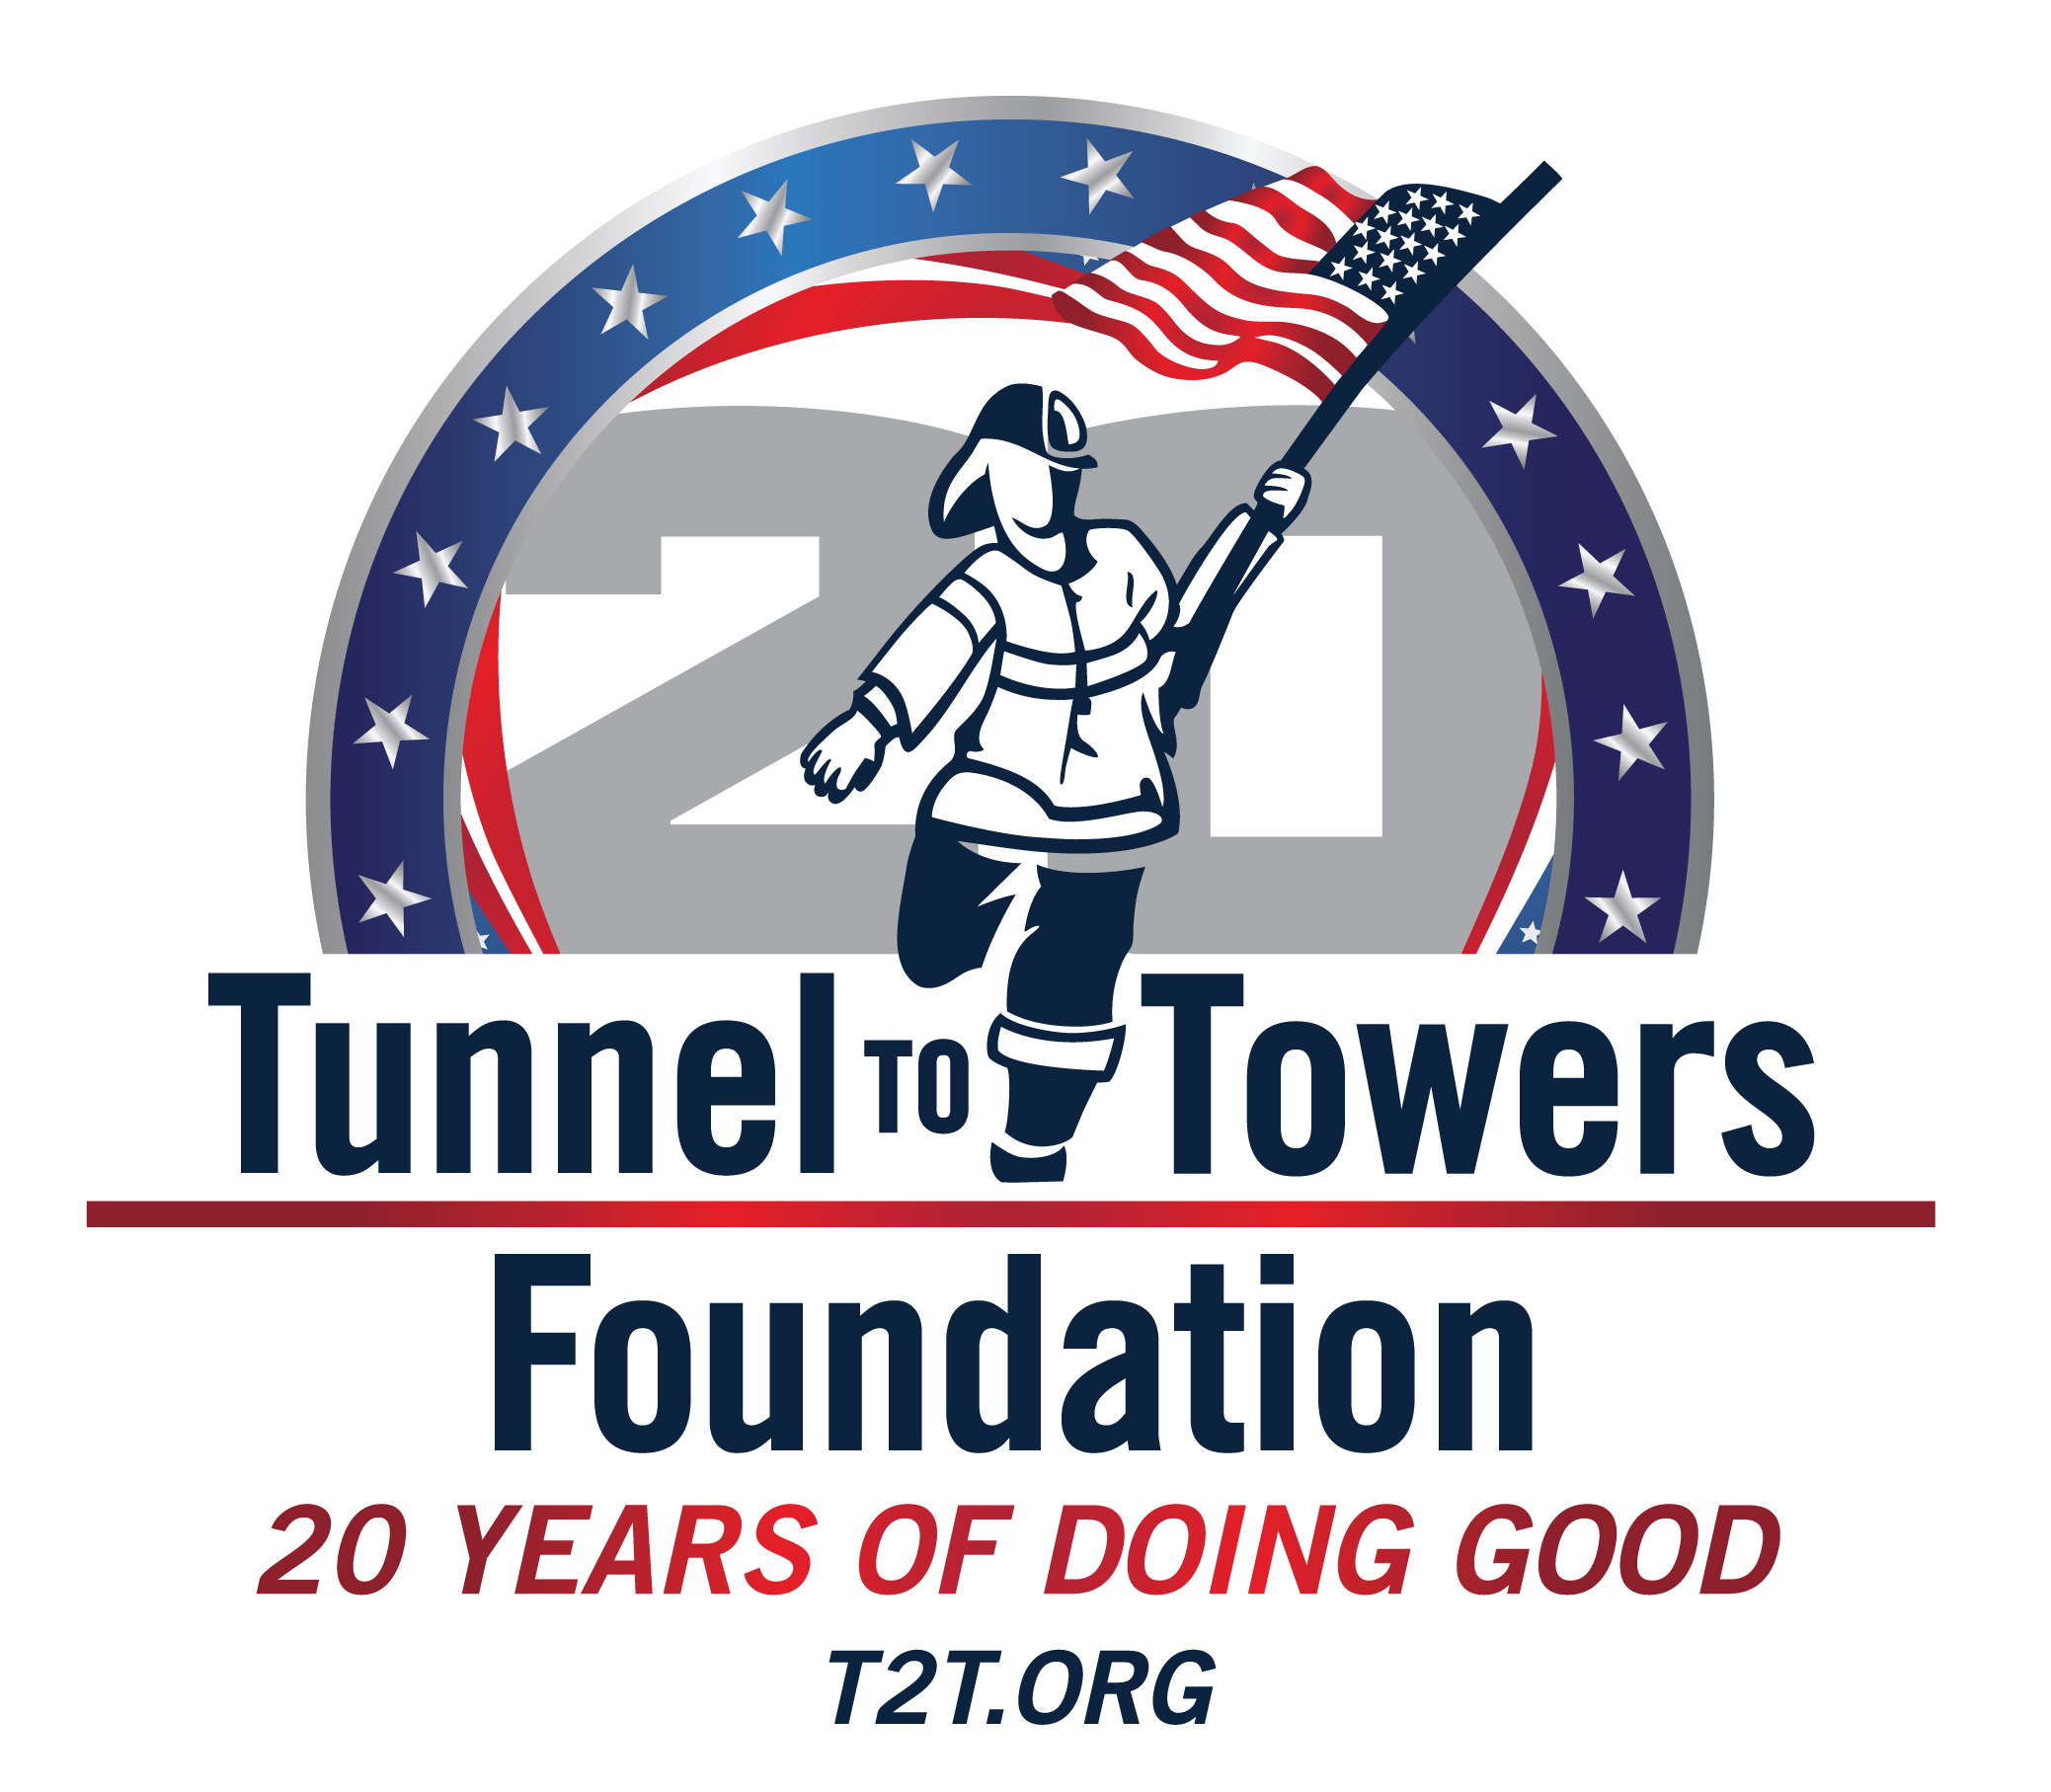 Tunnel to Towers to 